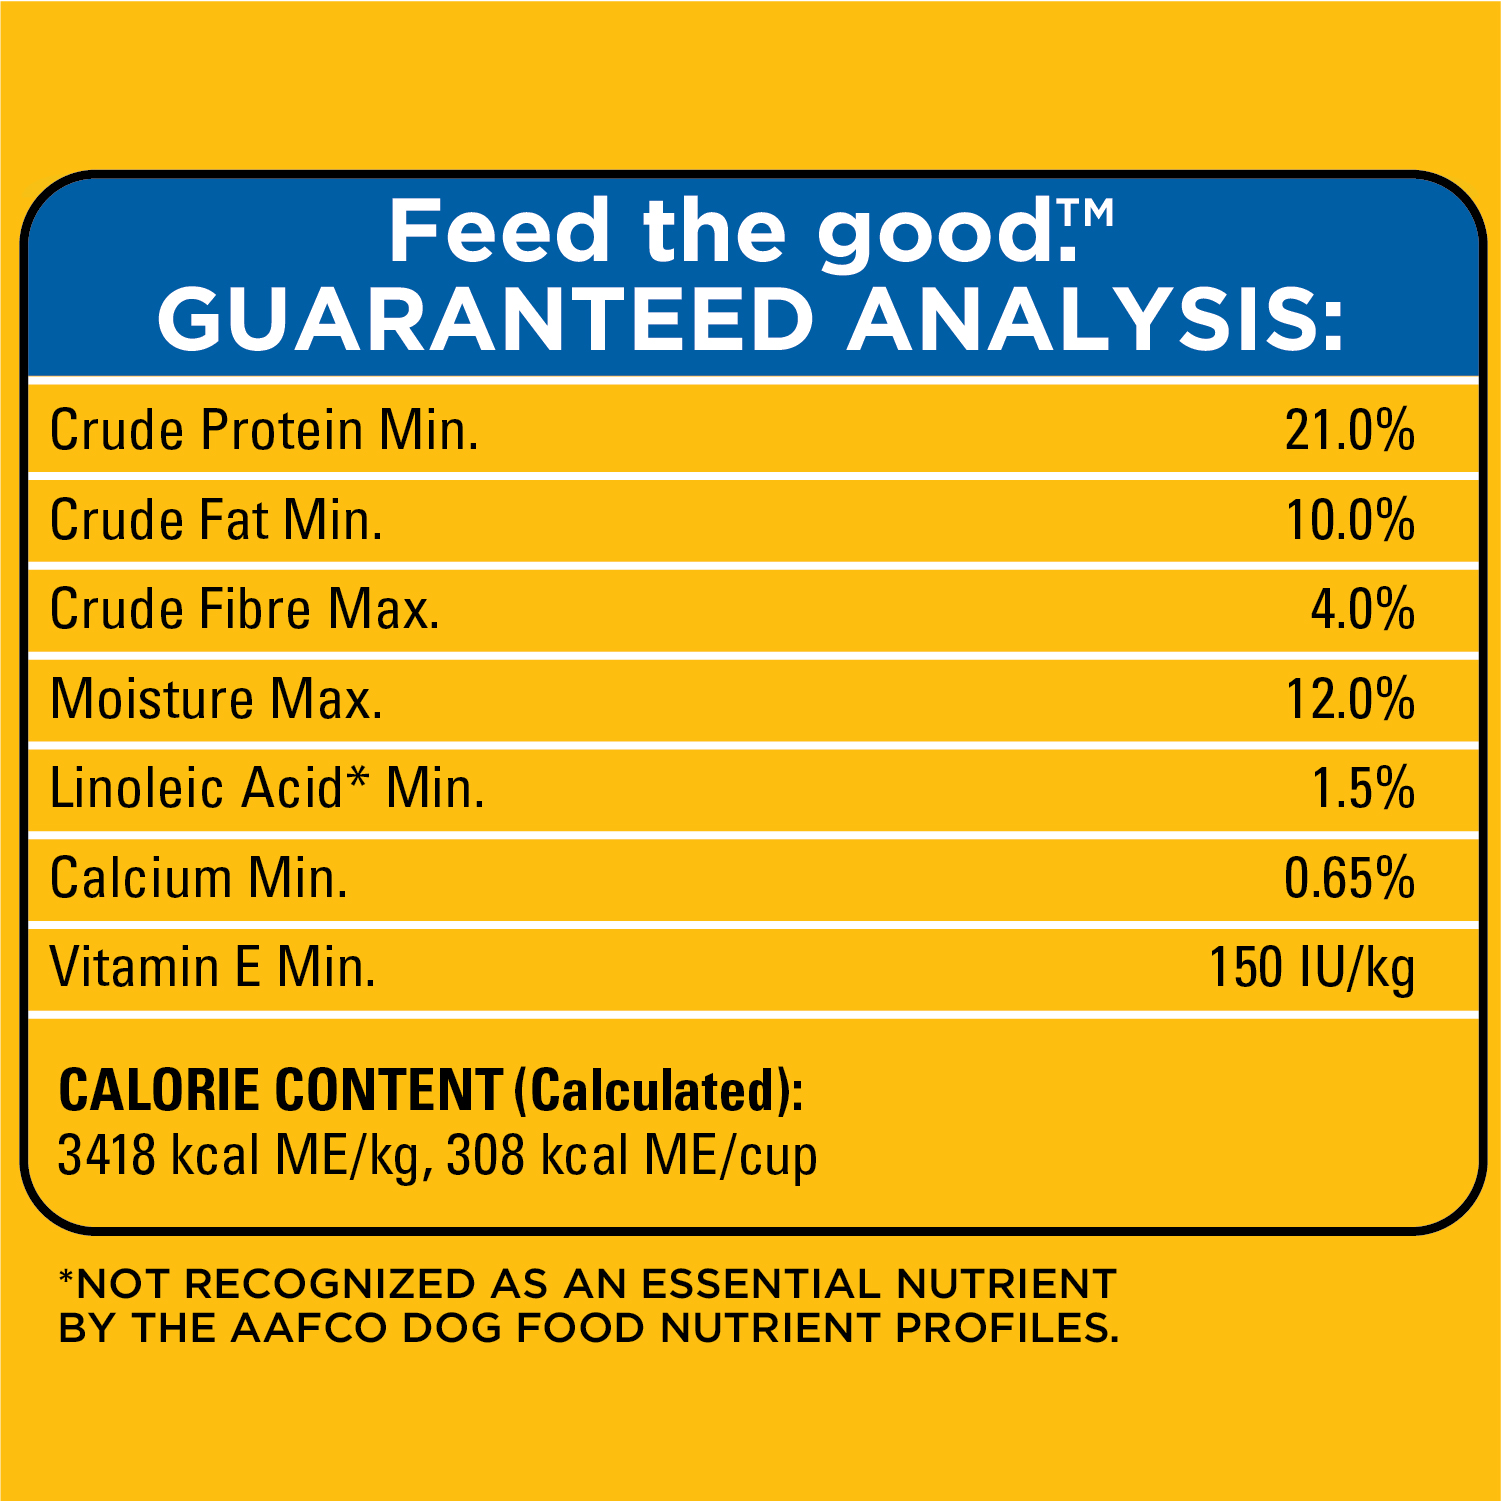 PEDIGREE® SMALL DOG+ HEARTY BEEF & VEGETABLE FLAVOUR DRY DOG FOOD guaranteed analysis image